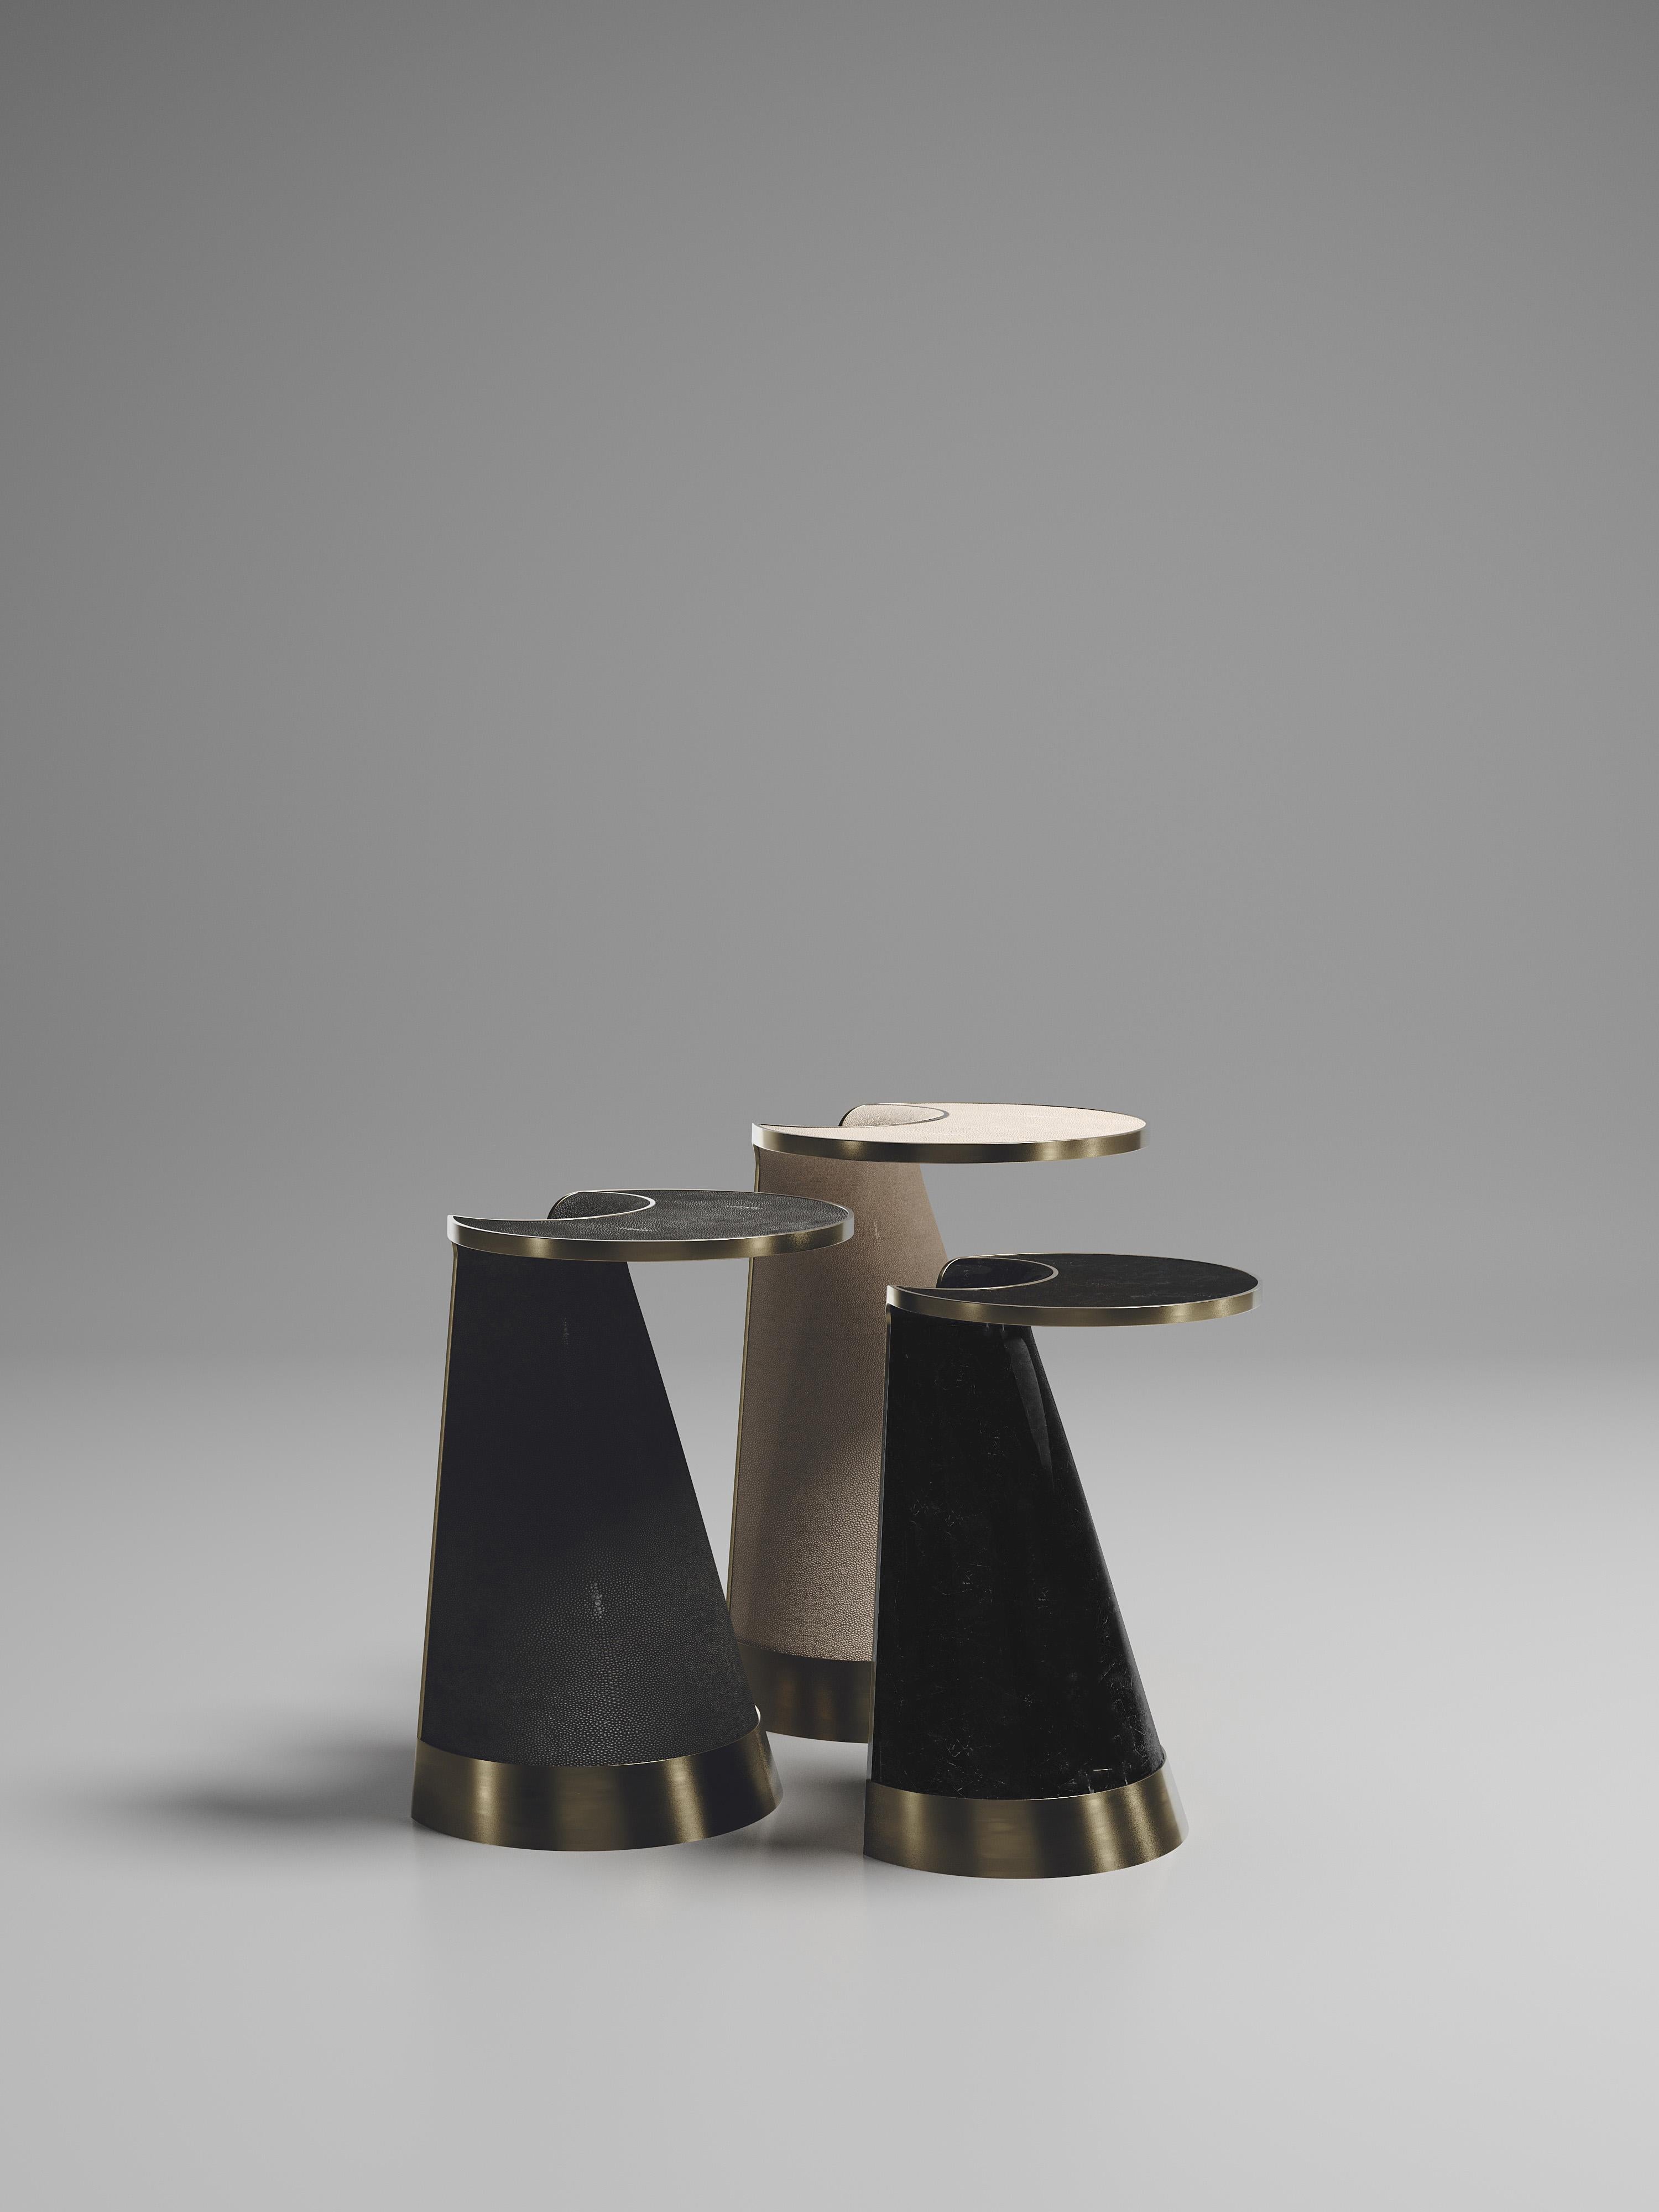 The Nymphea set of 3 nesting side tables by R & Y Augousti explore the brand's iconic DNA of bringing old world artisanal craft into a contemporary and utterly luxury feel. These pieces are done in different finish variations including shagreen, pen